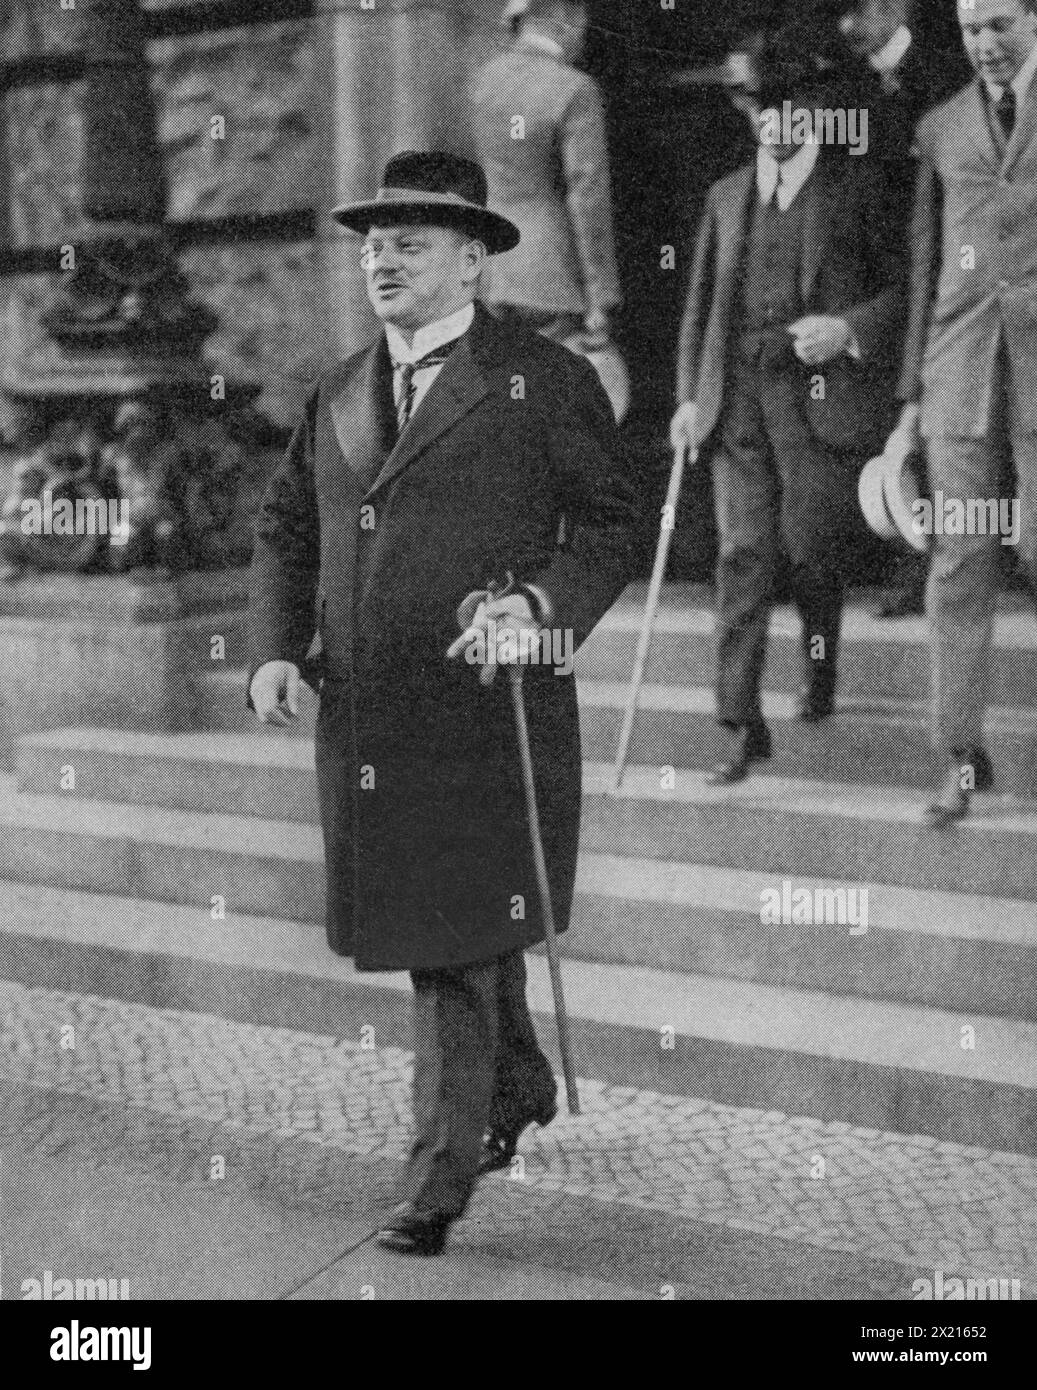 Stresemann, Gustav, 10.5.1878 - 3.10.1929, homme politique allemand (Parti populaire allemand), ADDITIONAL-RIGHTS-LEARANCE-INFO-NOT-AVAILABLE Banque D'Images